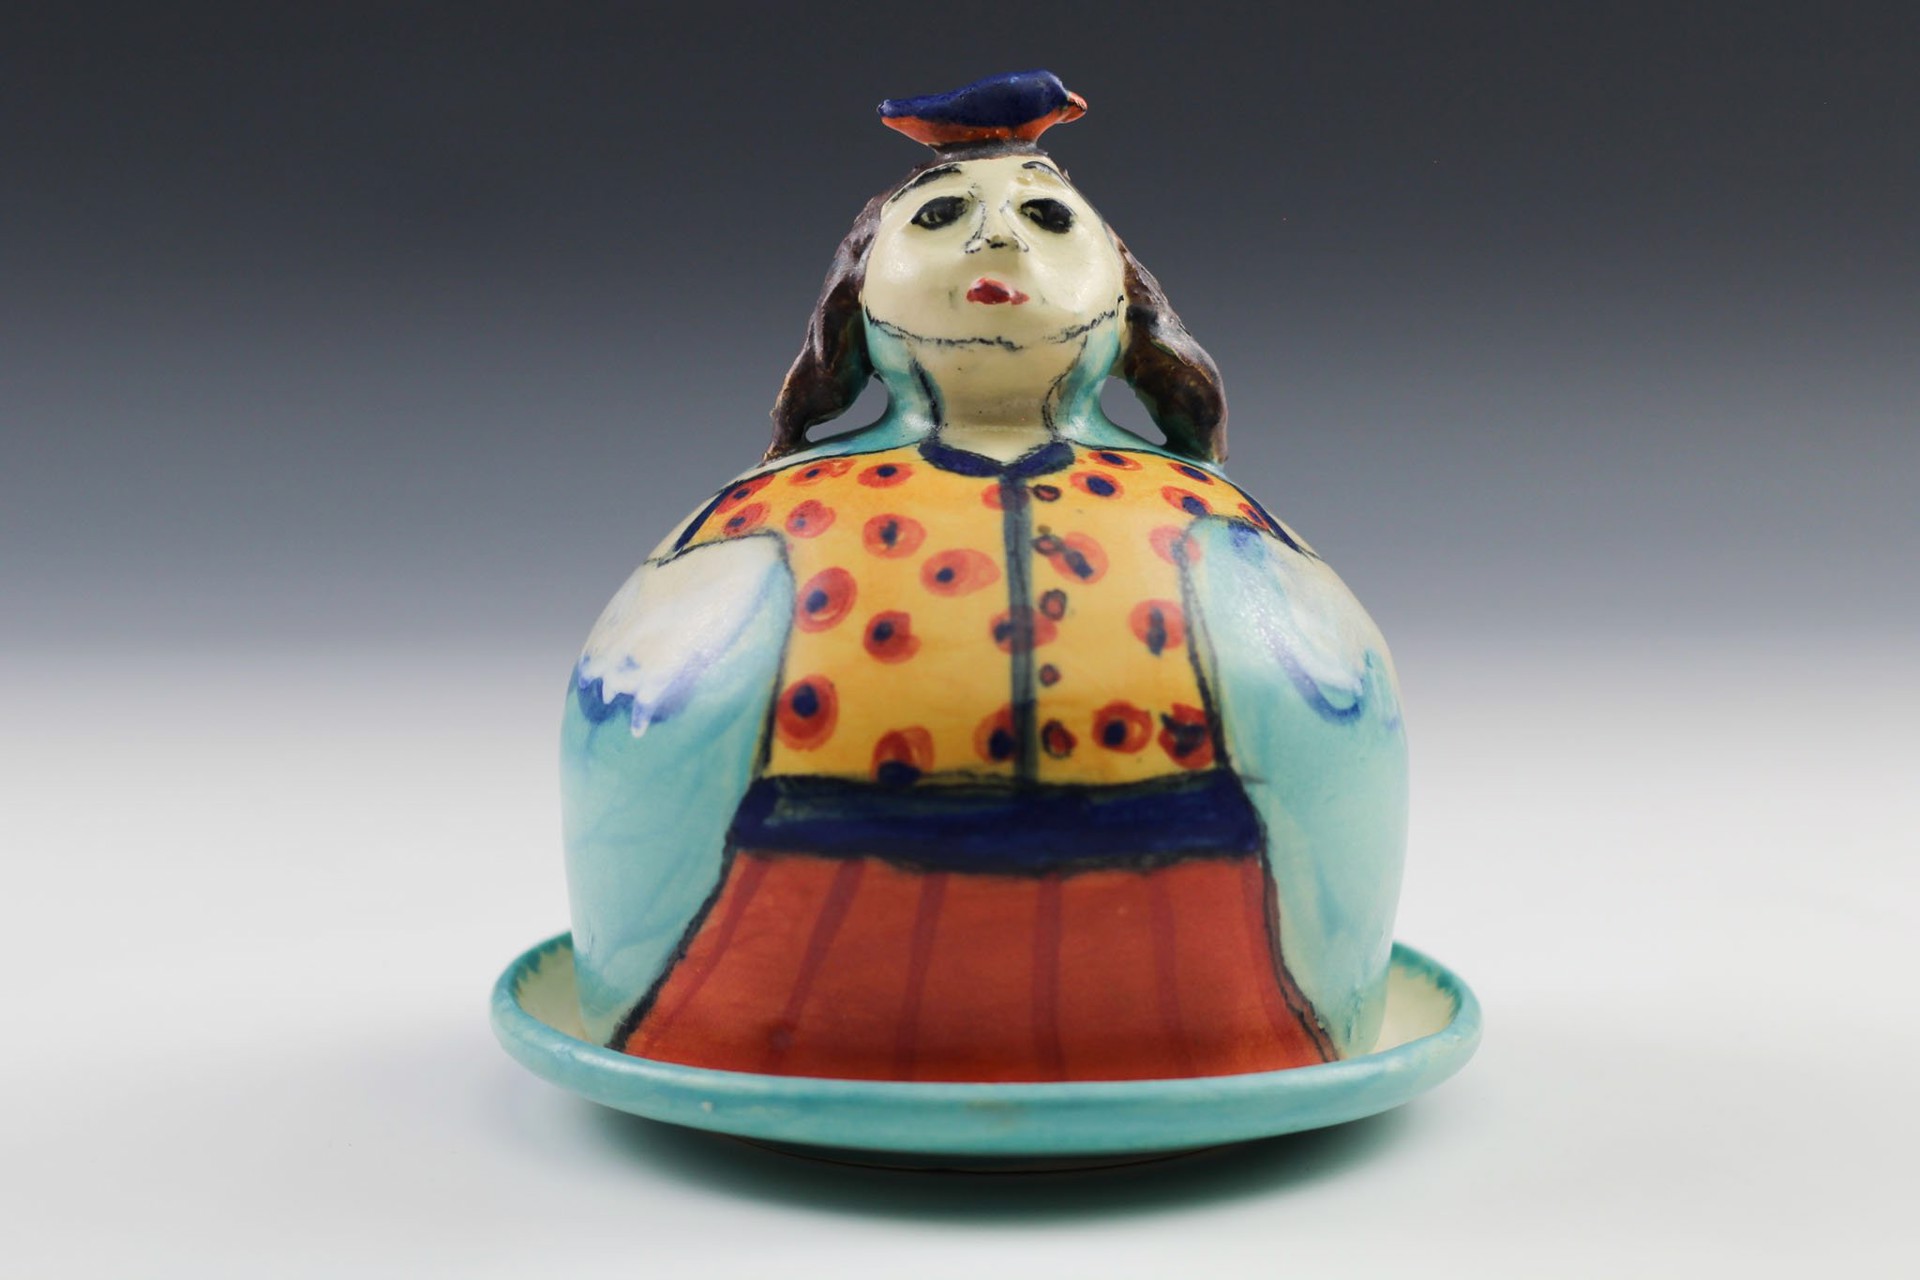 Butter Dish Girl by Wendy Olson